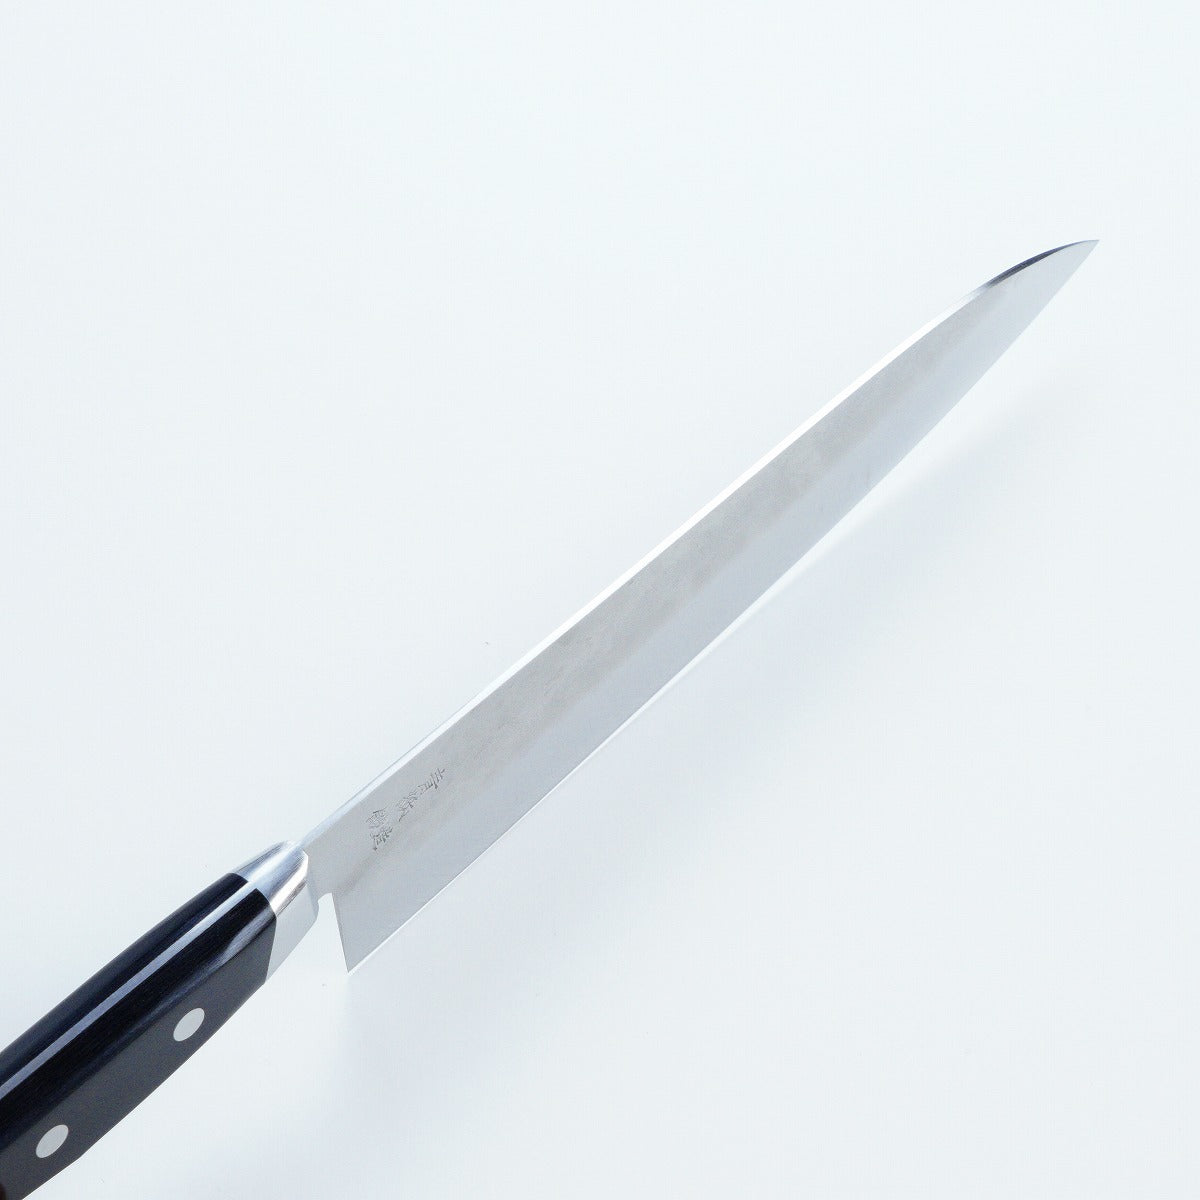 "HONMAMON" Gyuto (Chef's Knife) Aogami Steel No.2 with Hammered Pattern, 200mm